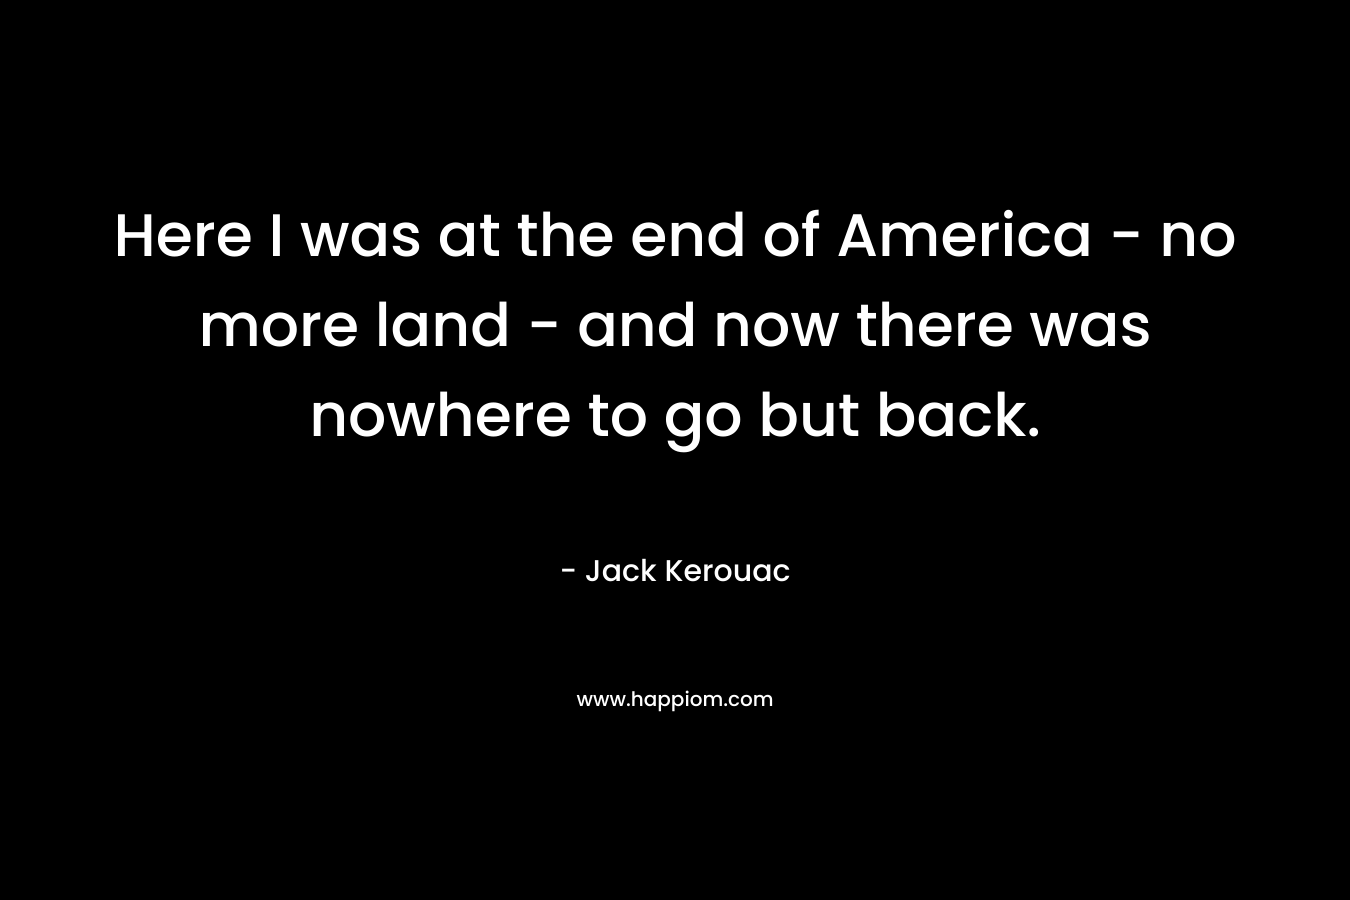 Here I was at the end of America - no more land - and now there was nowhere to go but back.